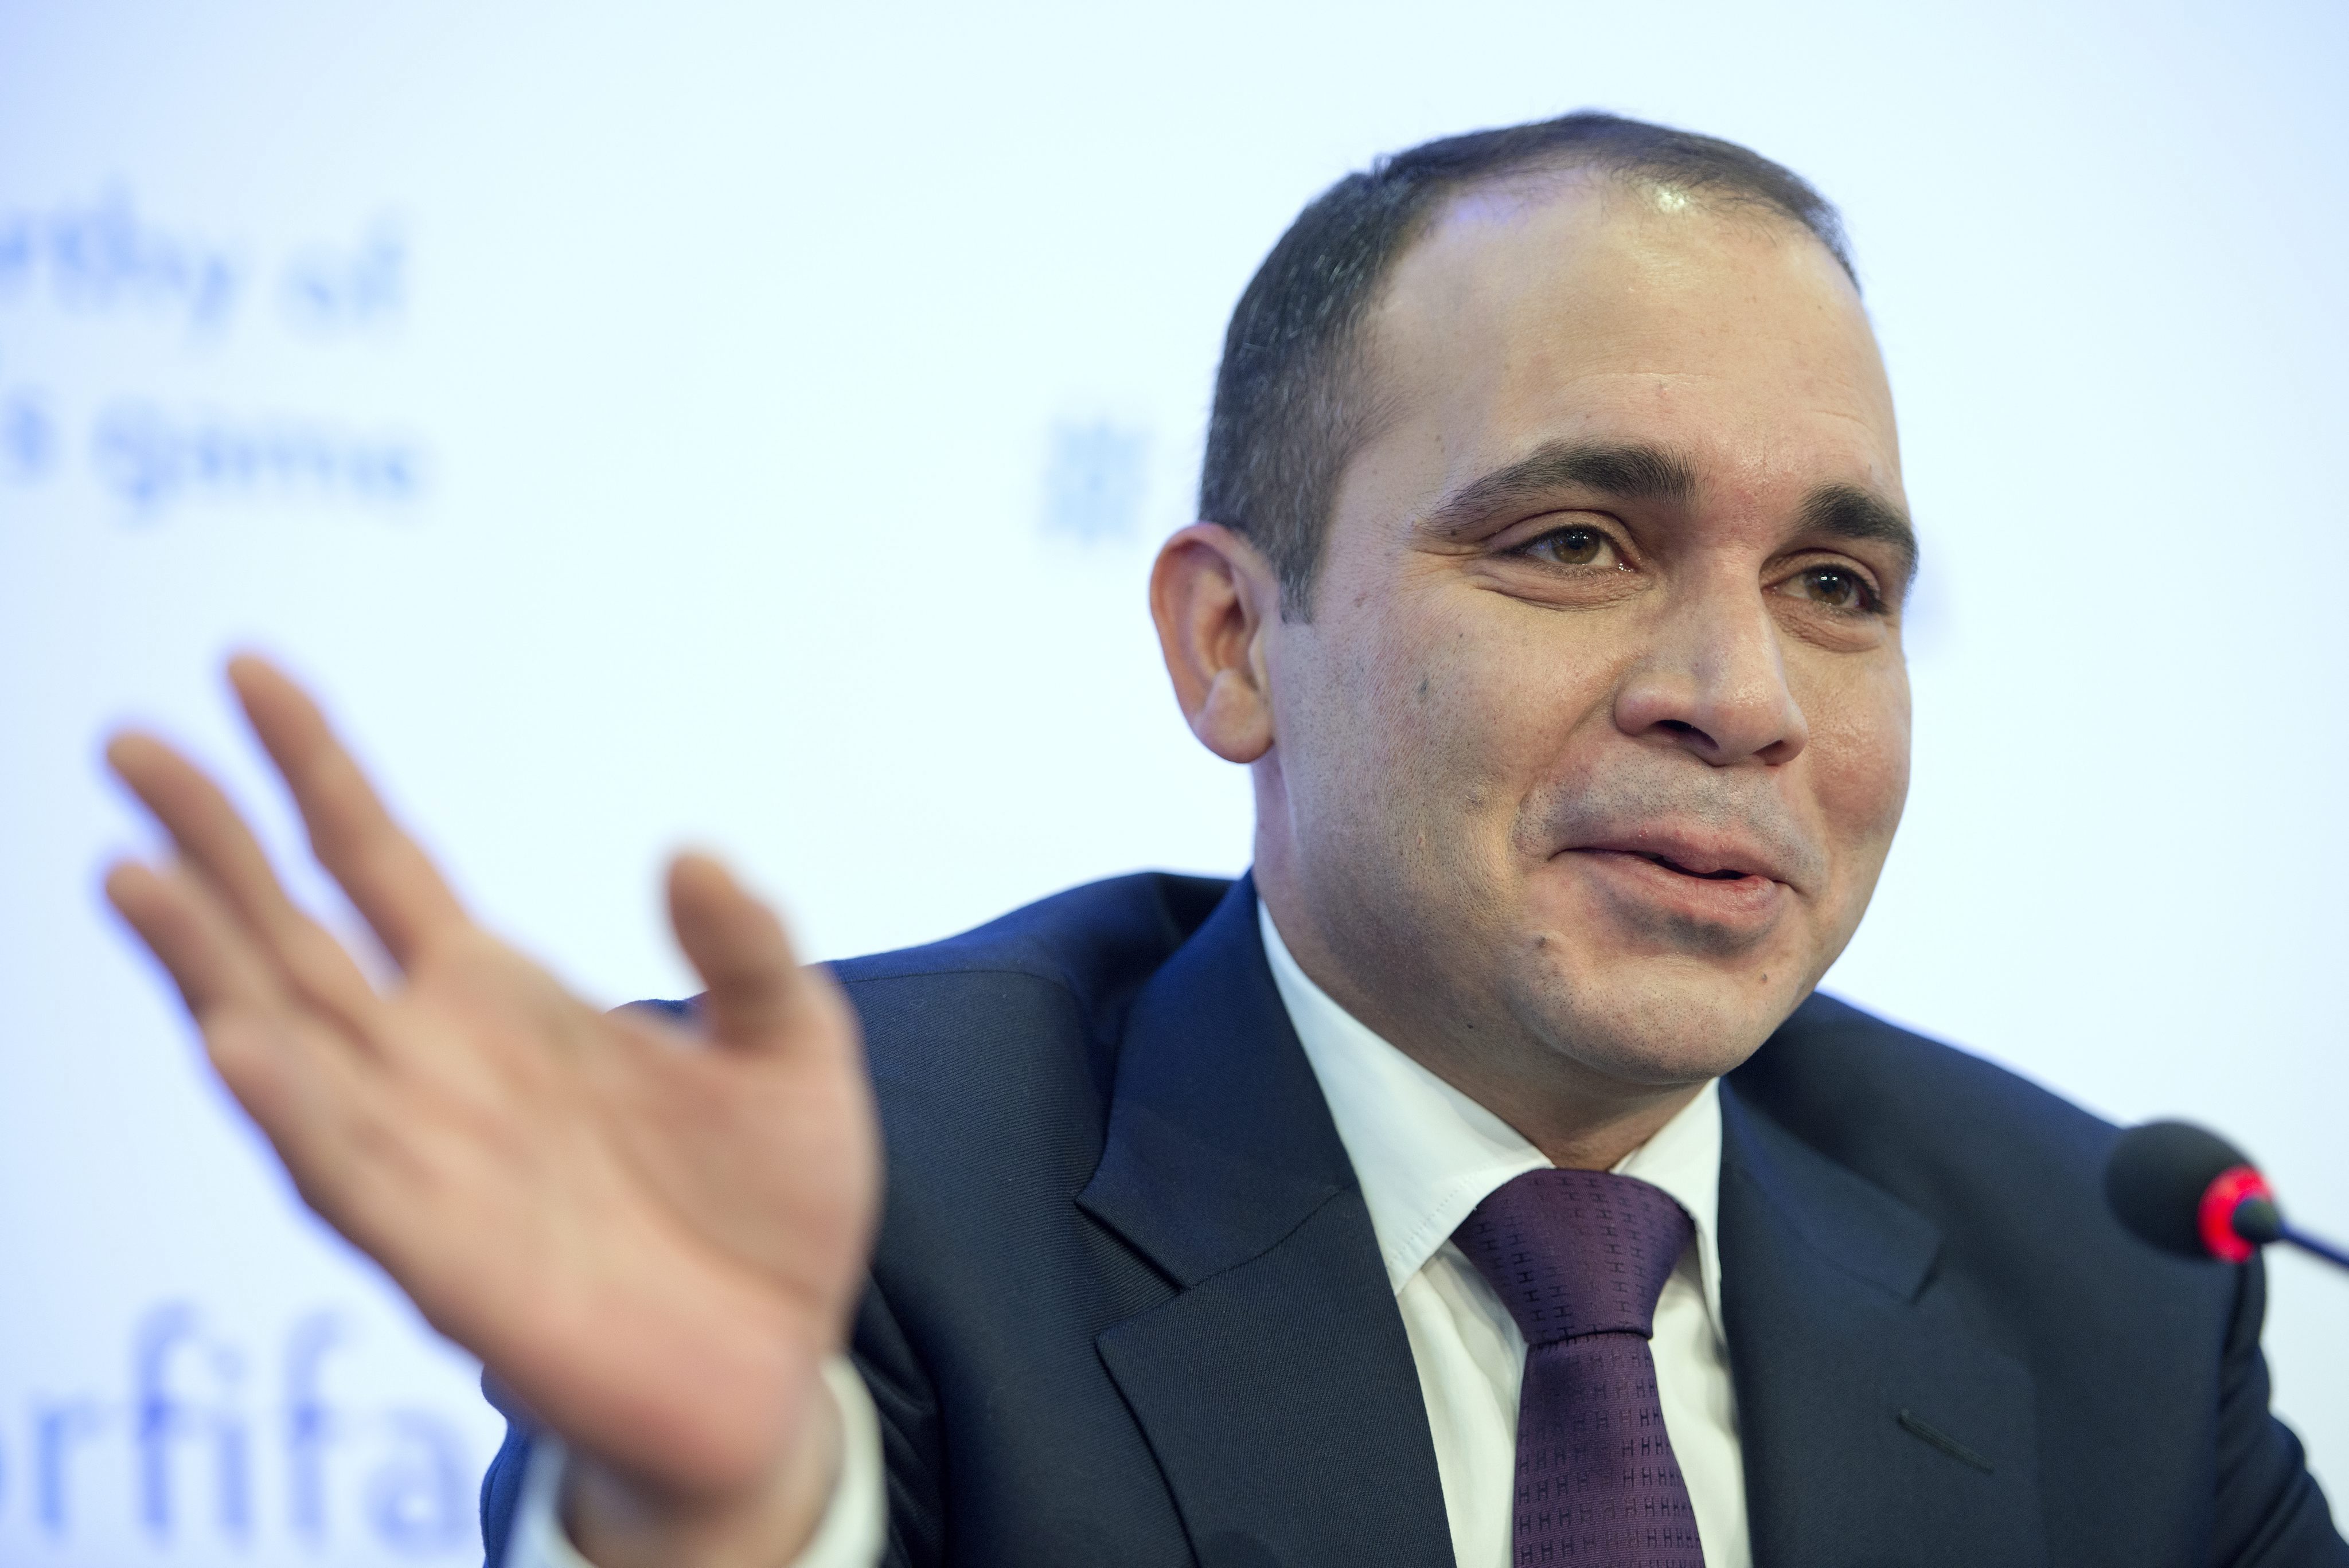 Fifa presidential candidate Prince Ali has gone to the Court of Arbitration for Sport over concerns he has on the election set for Friday. Photo: EPA